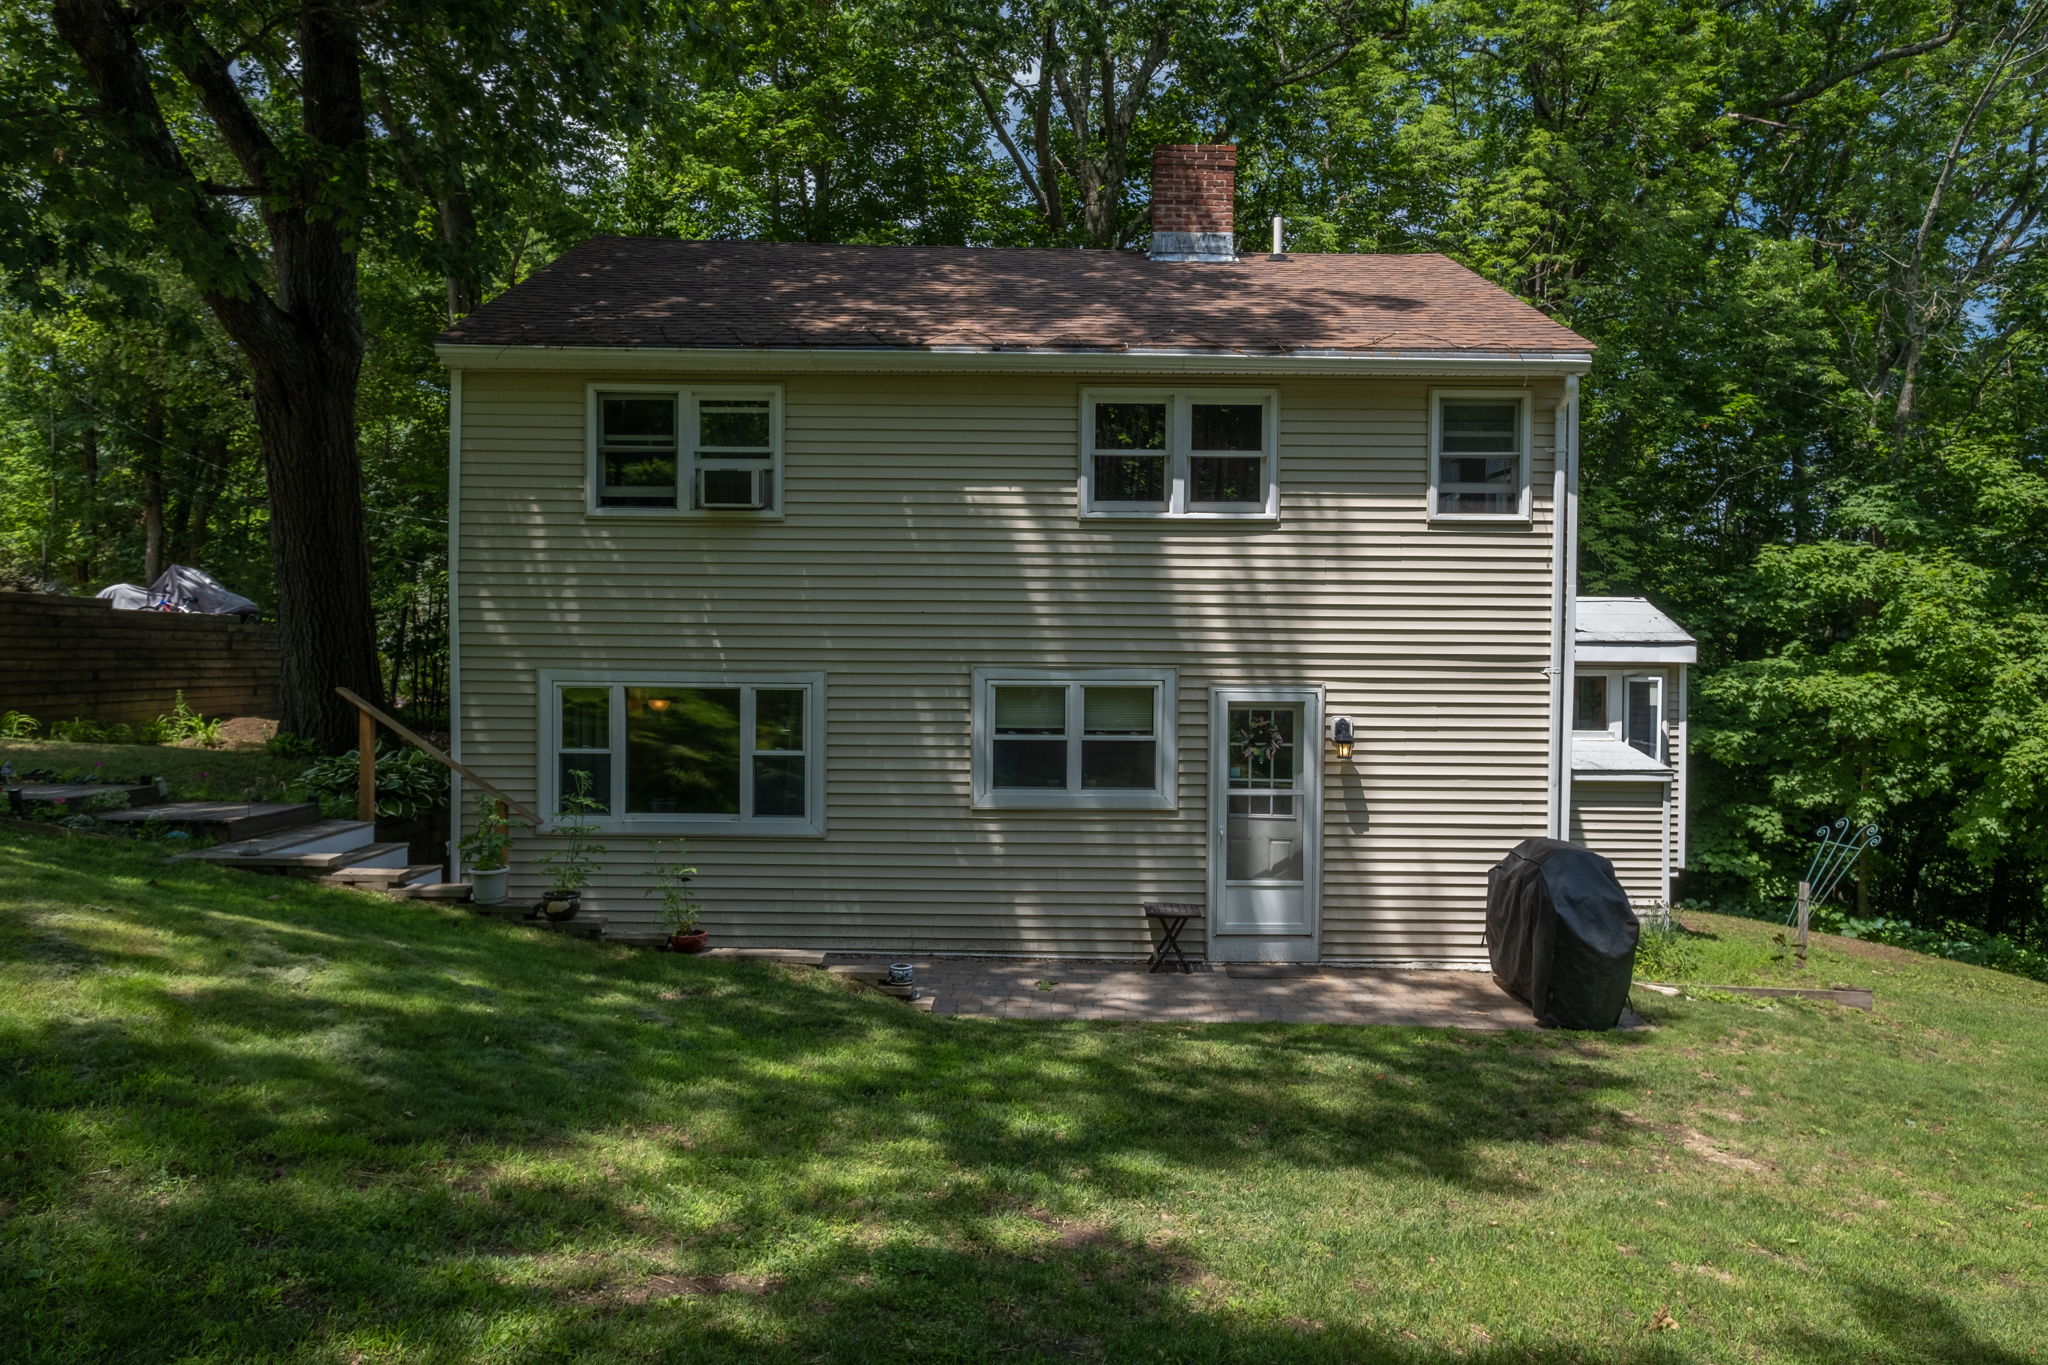  31 Carriage Rd, Bow, NH 03304, US